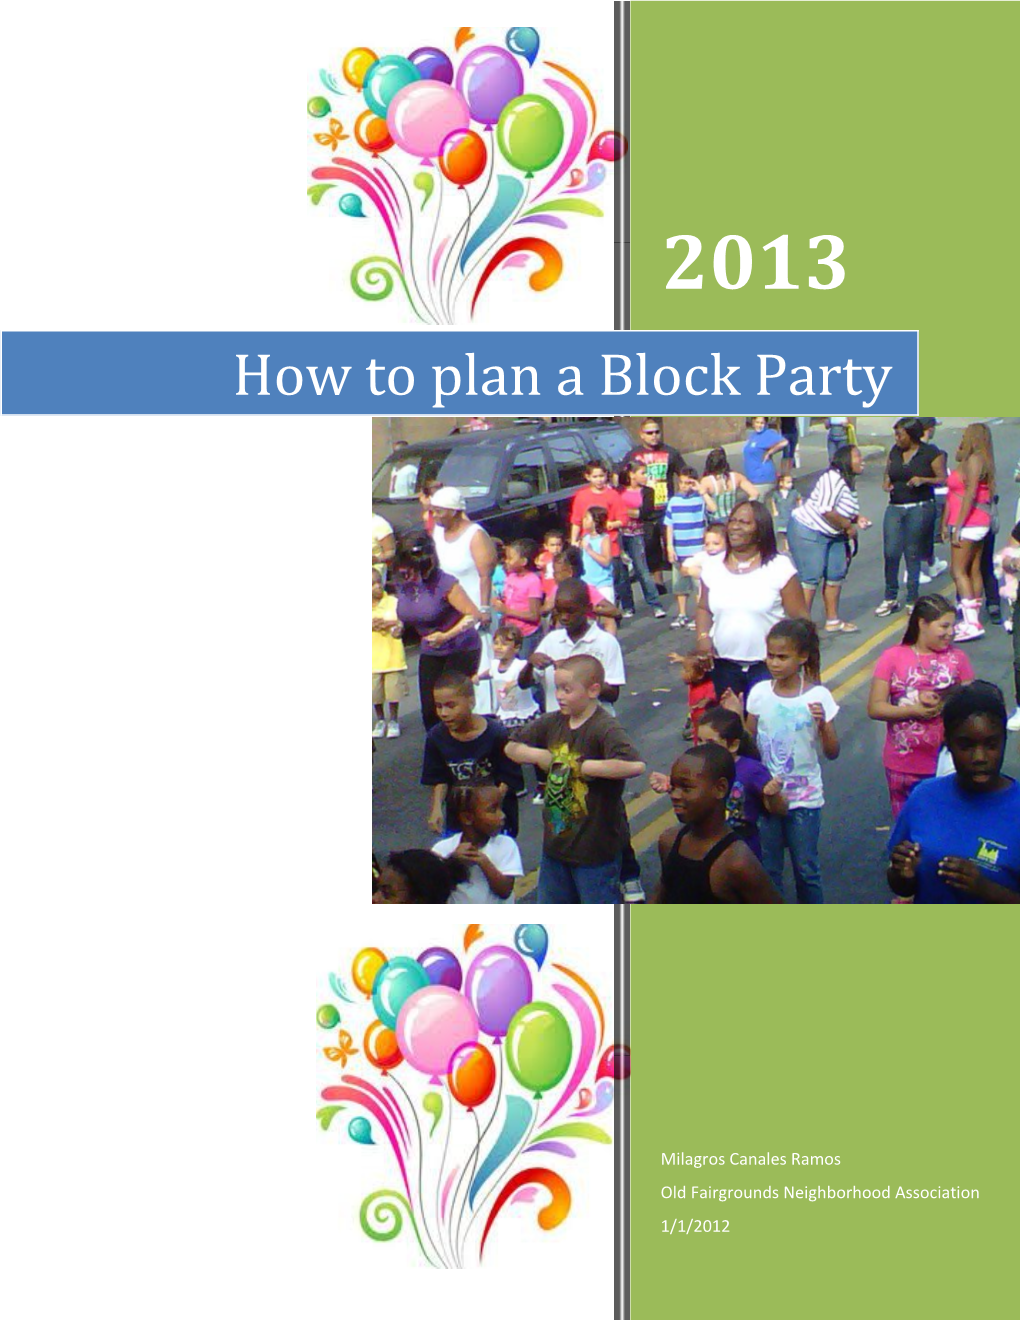 How to Plan a Block Party